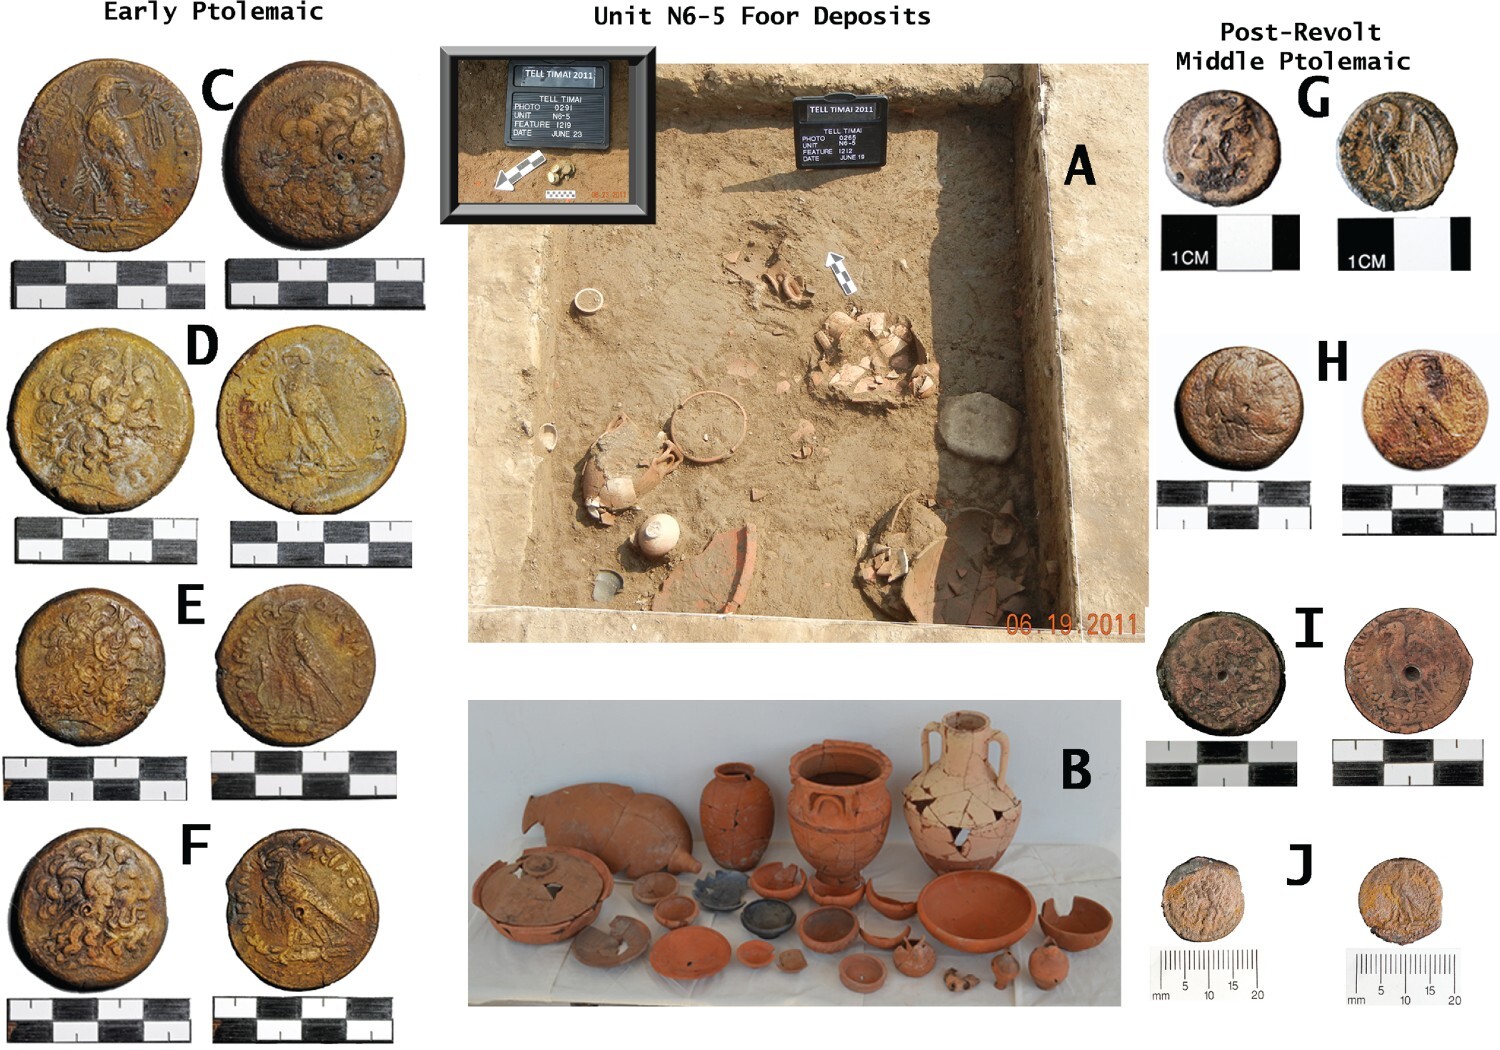 A sample of coins from the coin hoard and from the fill-leveling layer